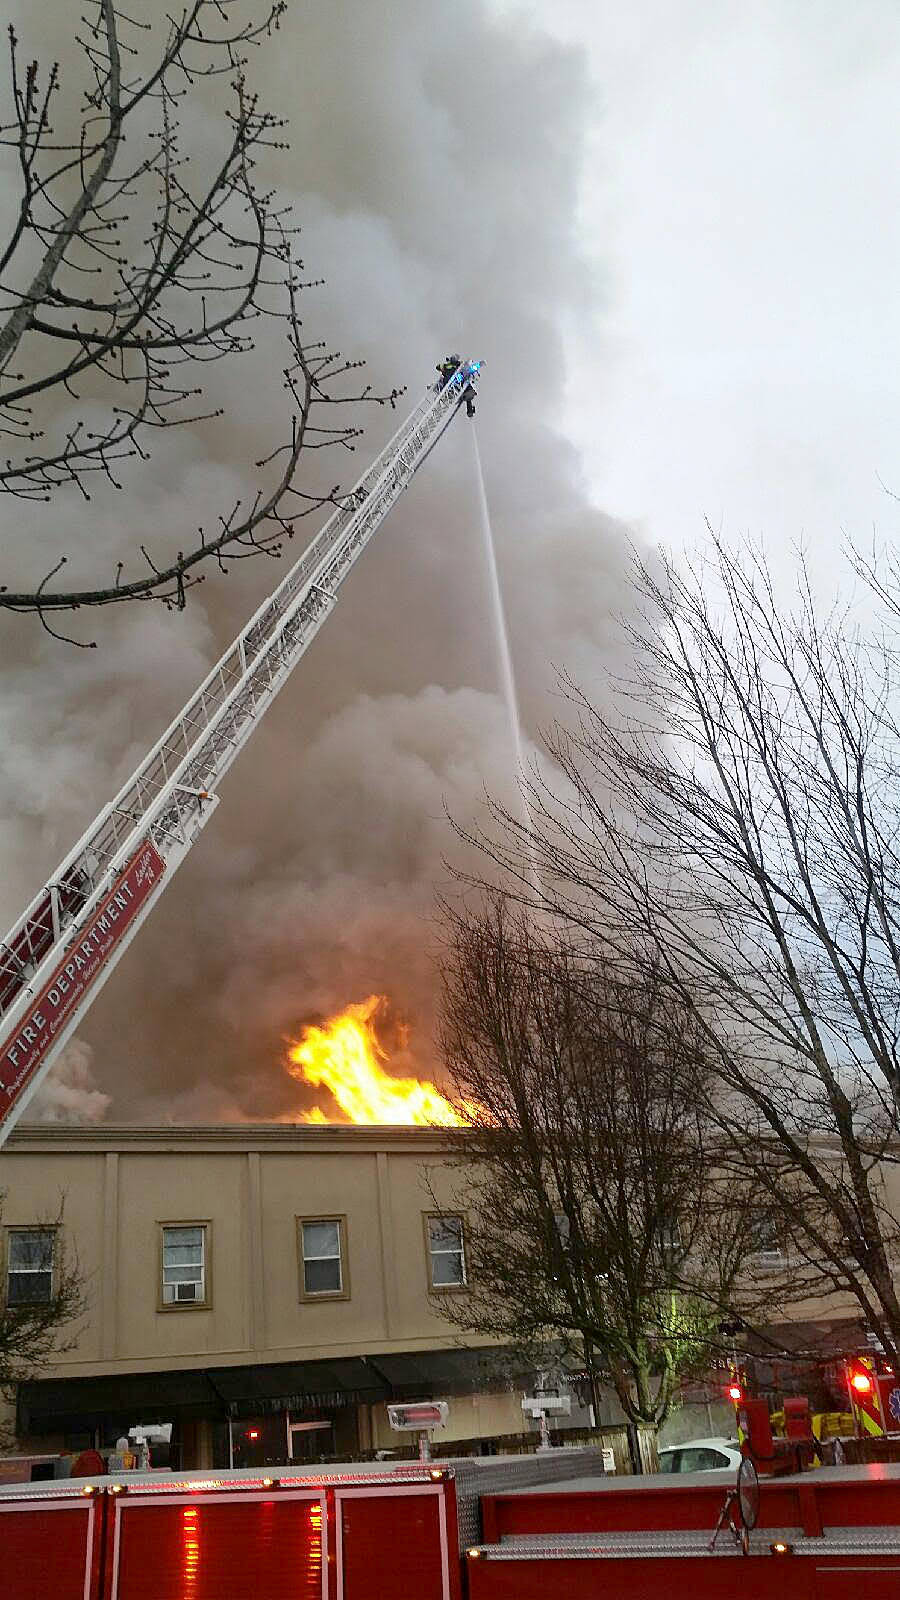 With the aid of ladder trucks, local firefighters try to contain a massive blaze in downtown Auburn late Tuesday afternoon. ROBERT WHALE, Auburn Reporter